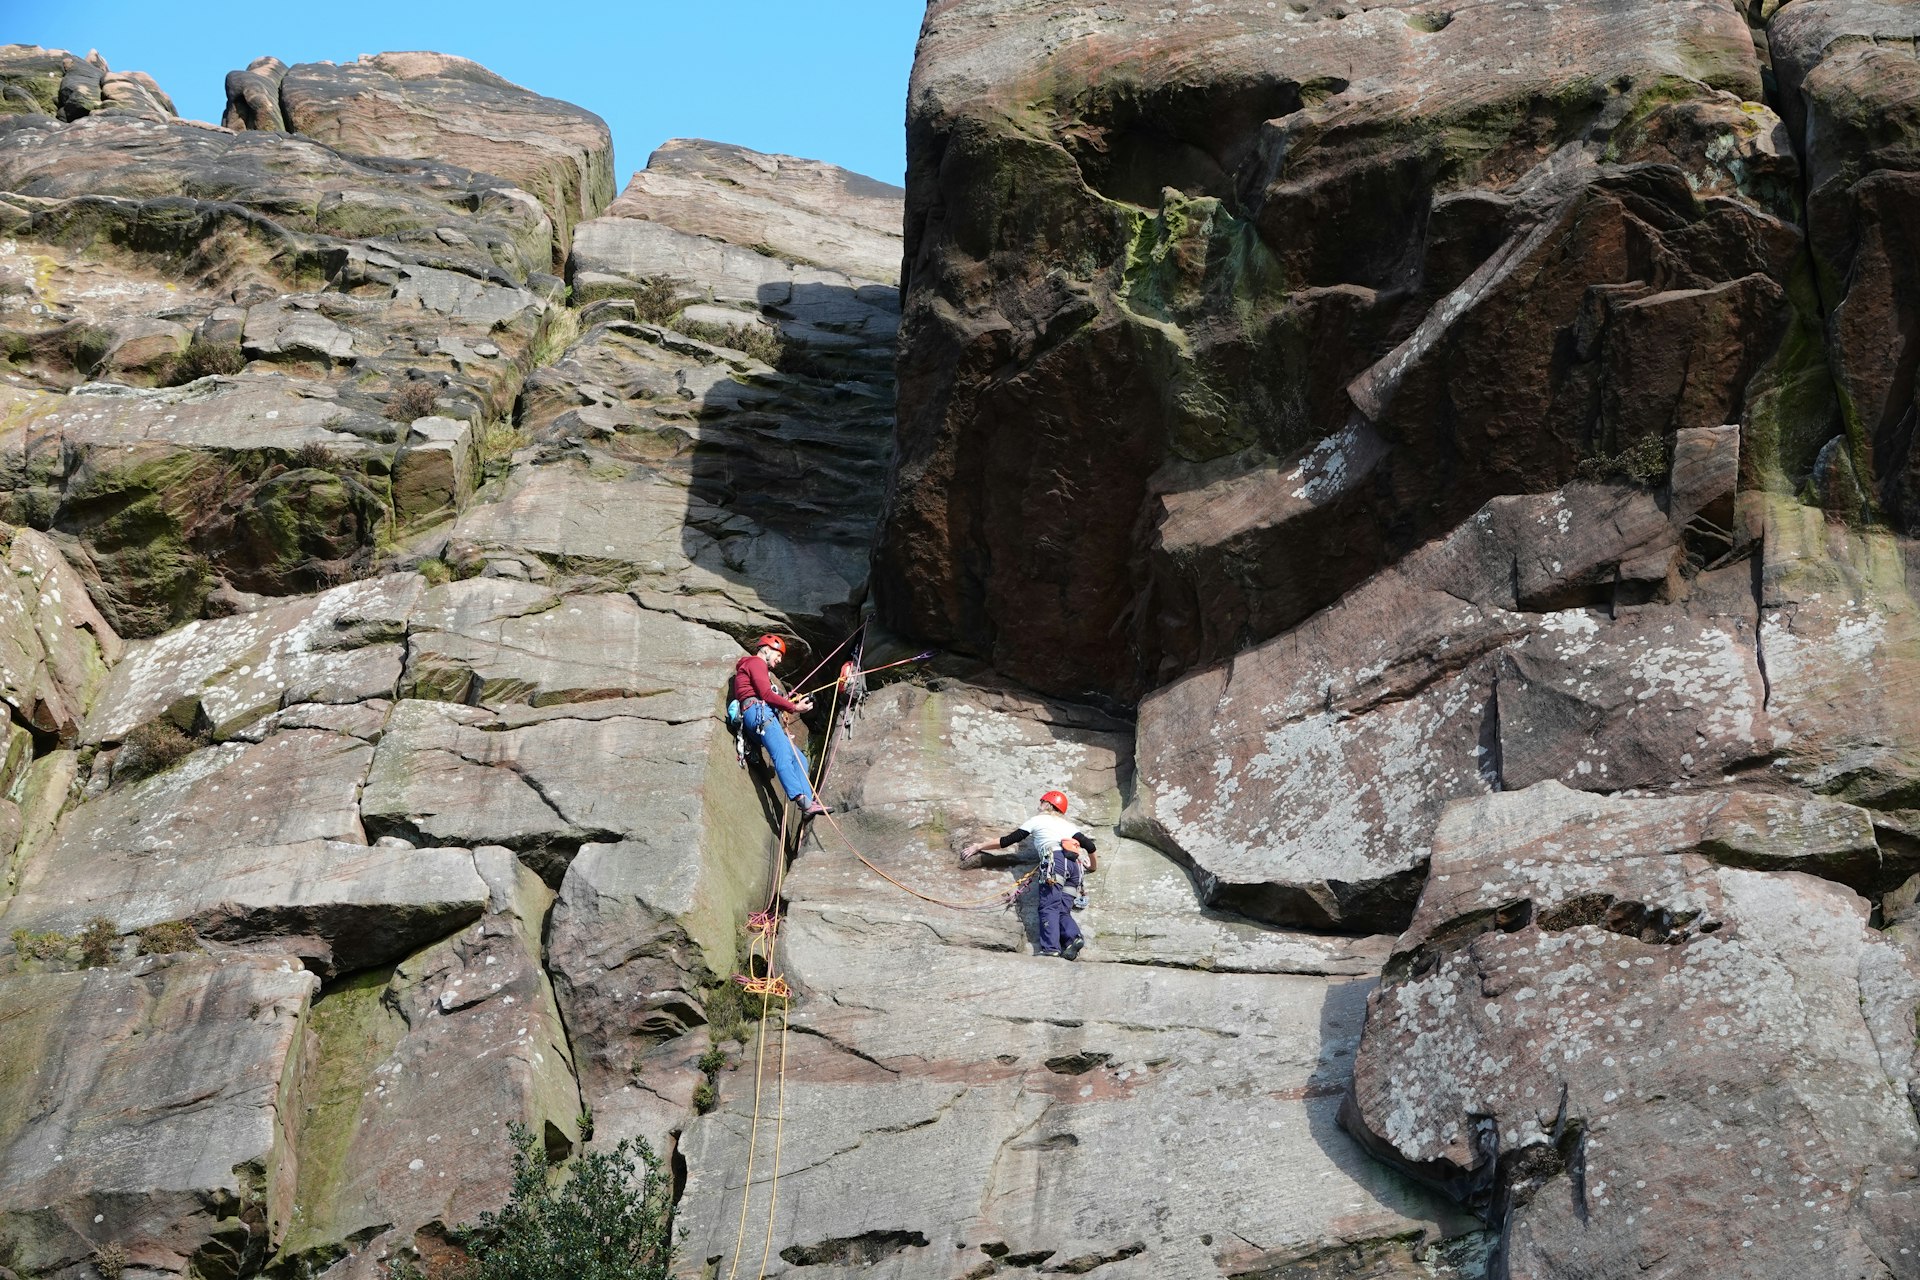 Two climbers on ropes at the face of a large rock in the Peak District National Park